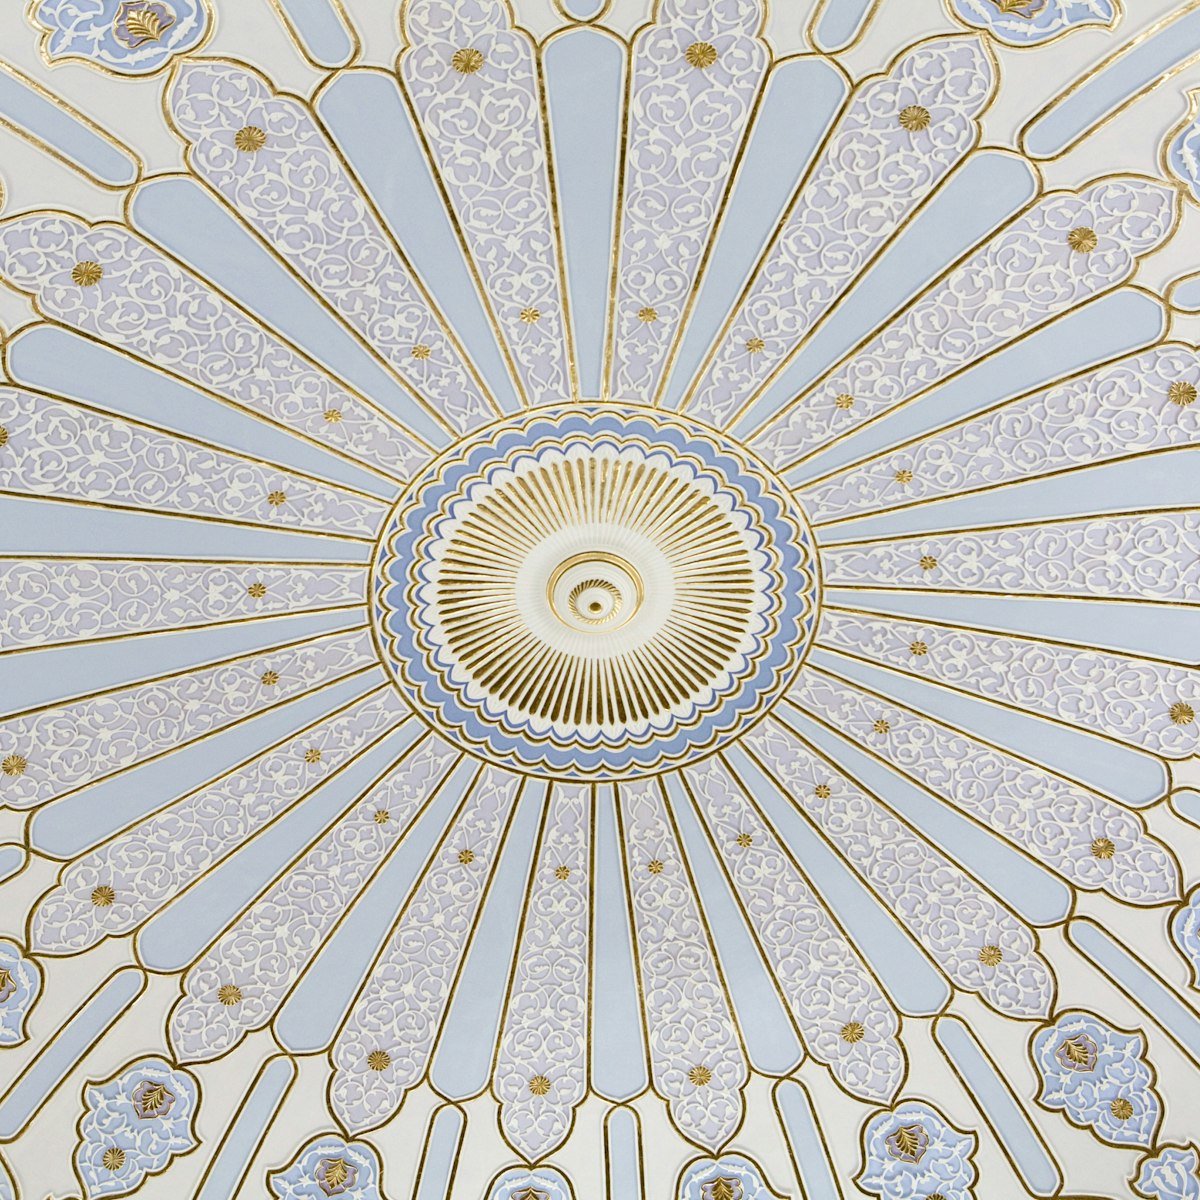 Detail of ceiling in Islamic Arts Museum.